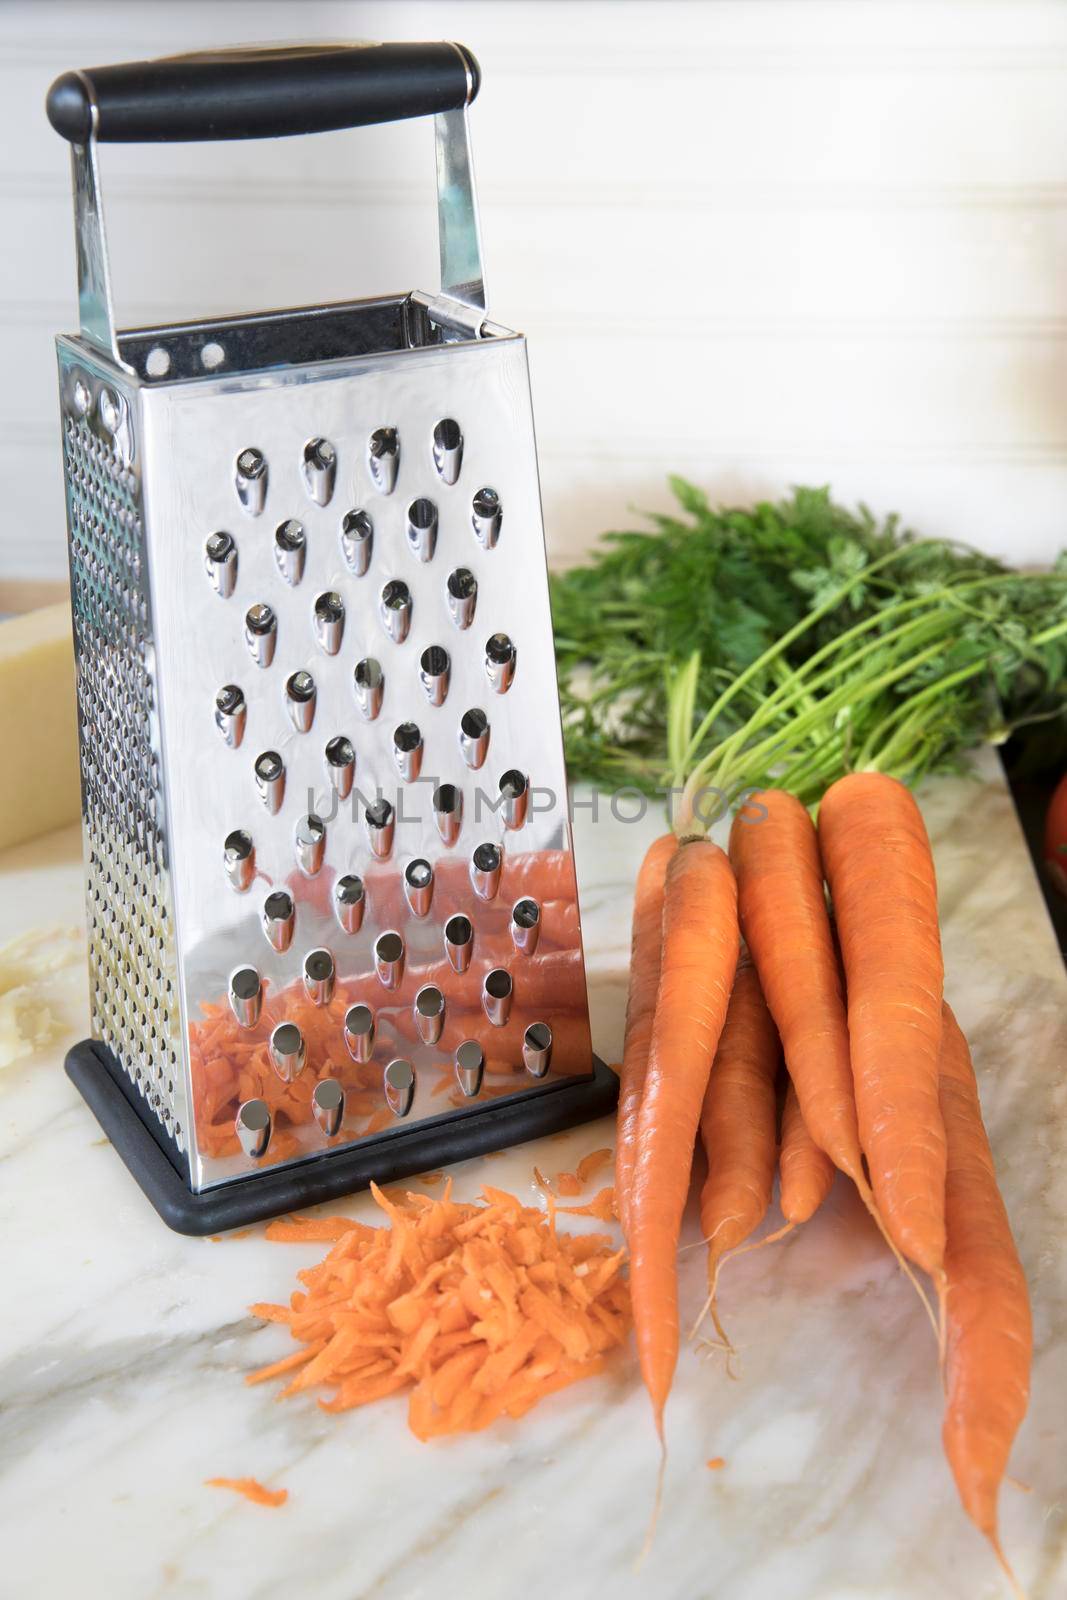 Cheese grater with whole and grated carrots on marble surface.